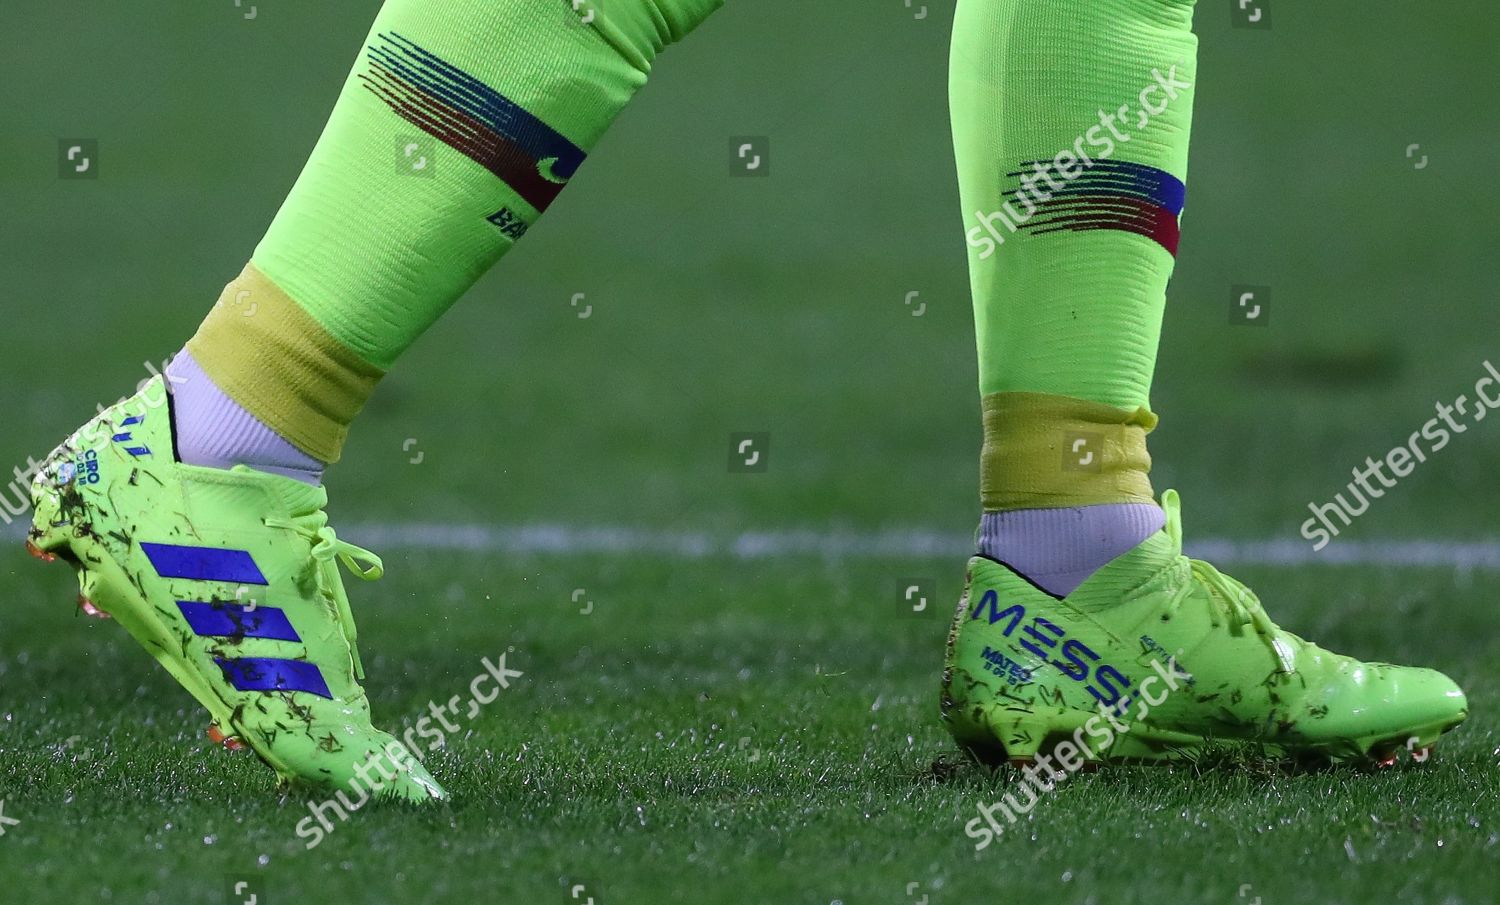 Adidas Boots Lionel Messi Fc Barcelona Editorial - Stock | Shutterstock